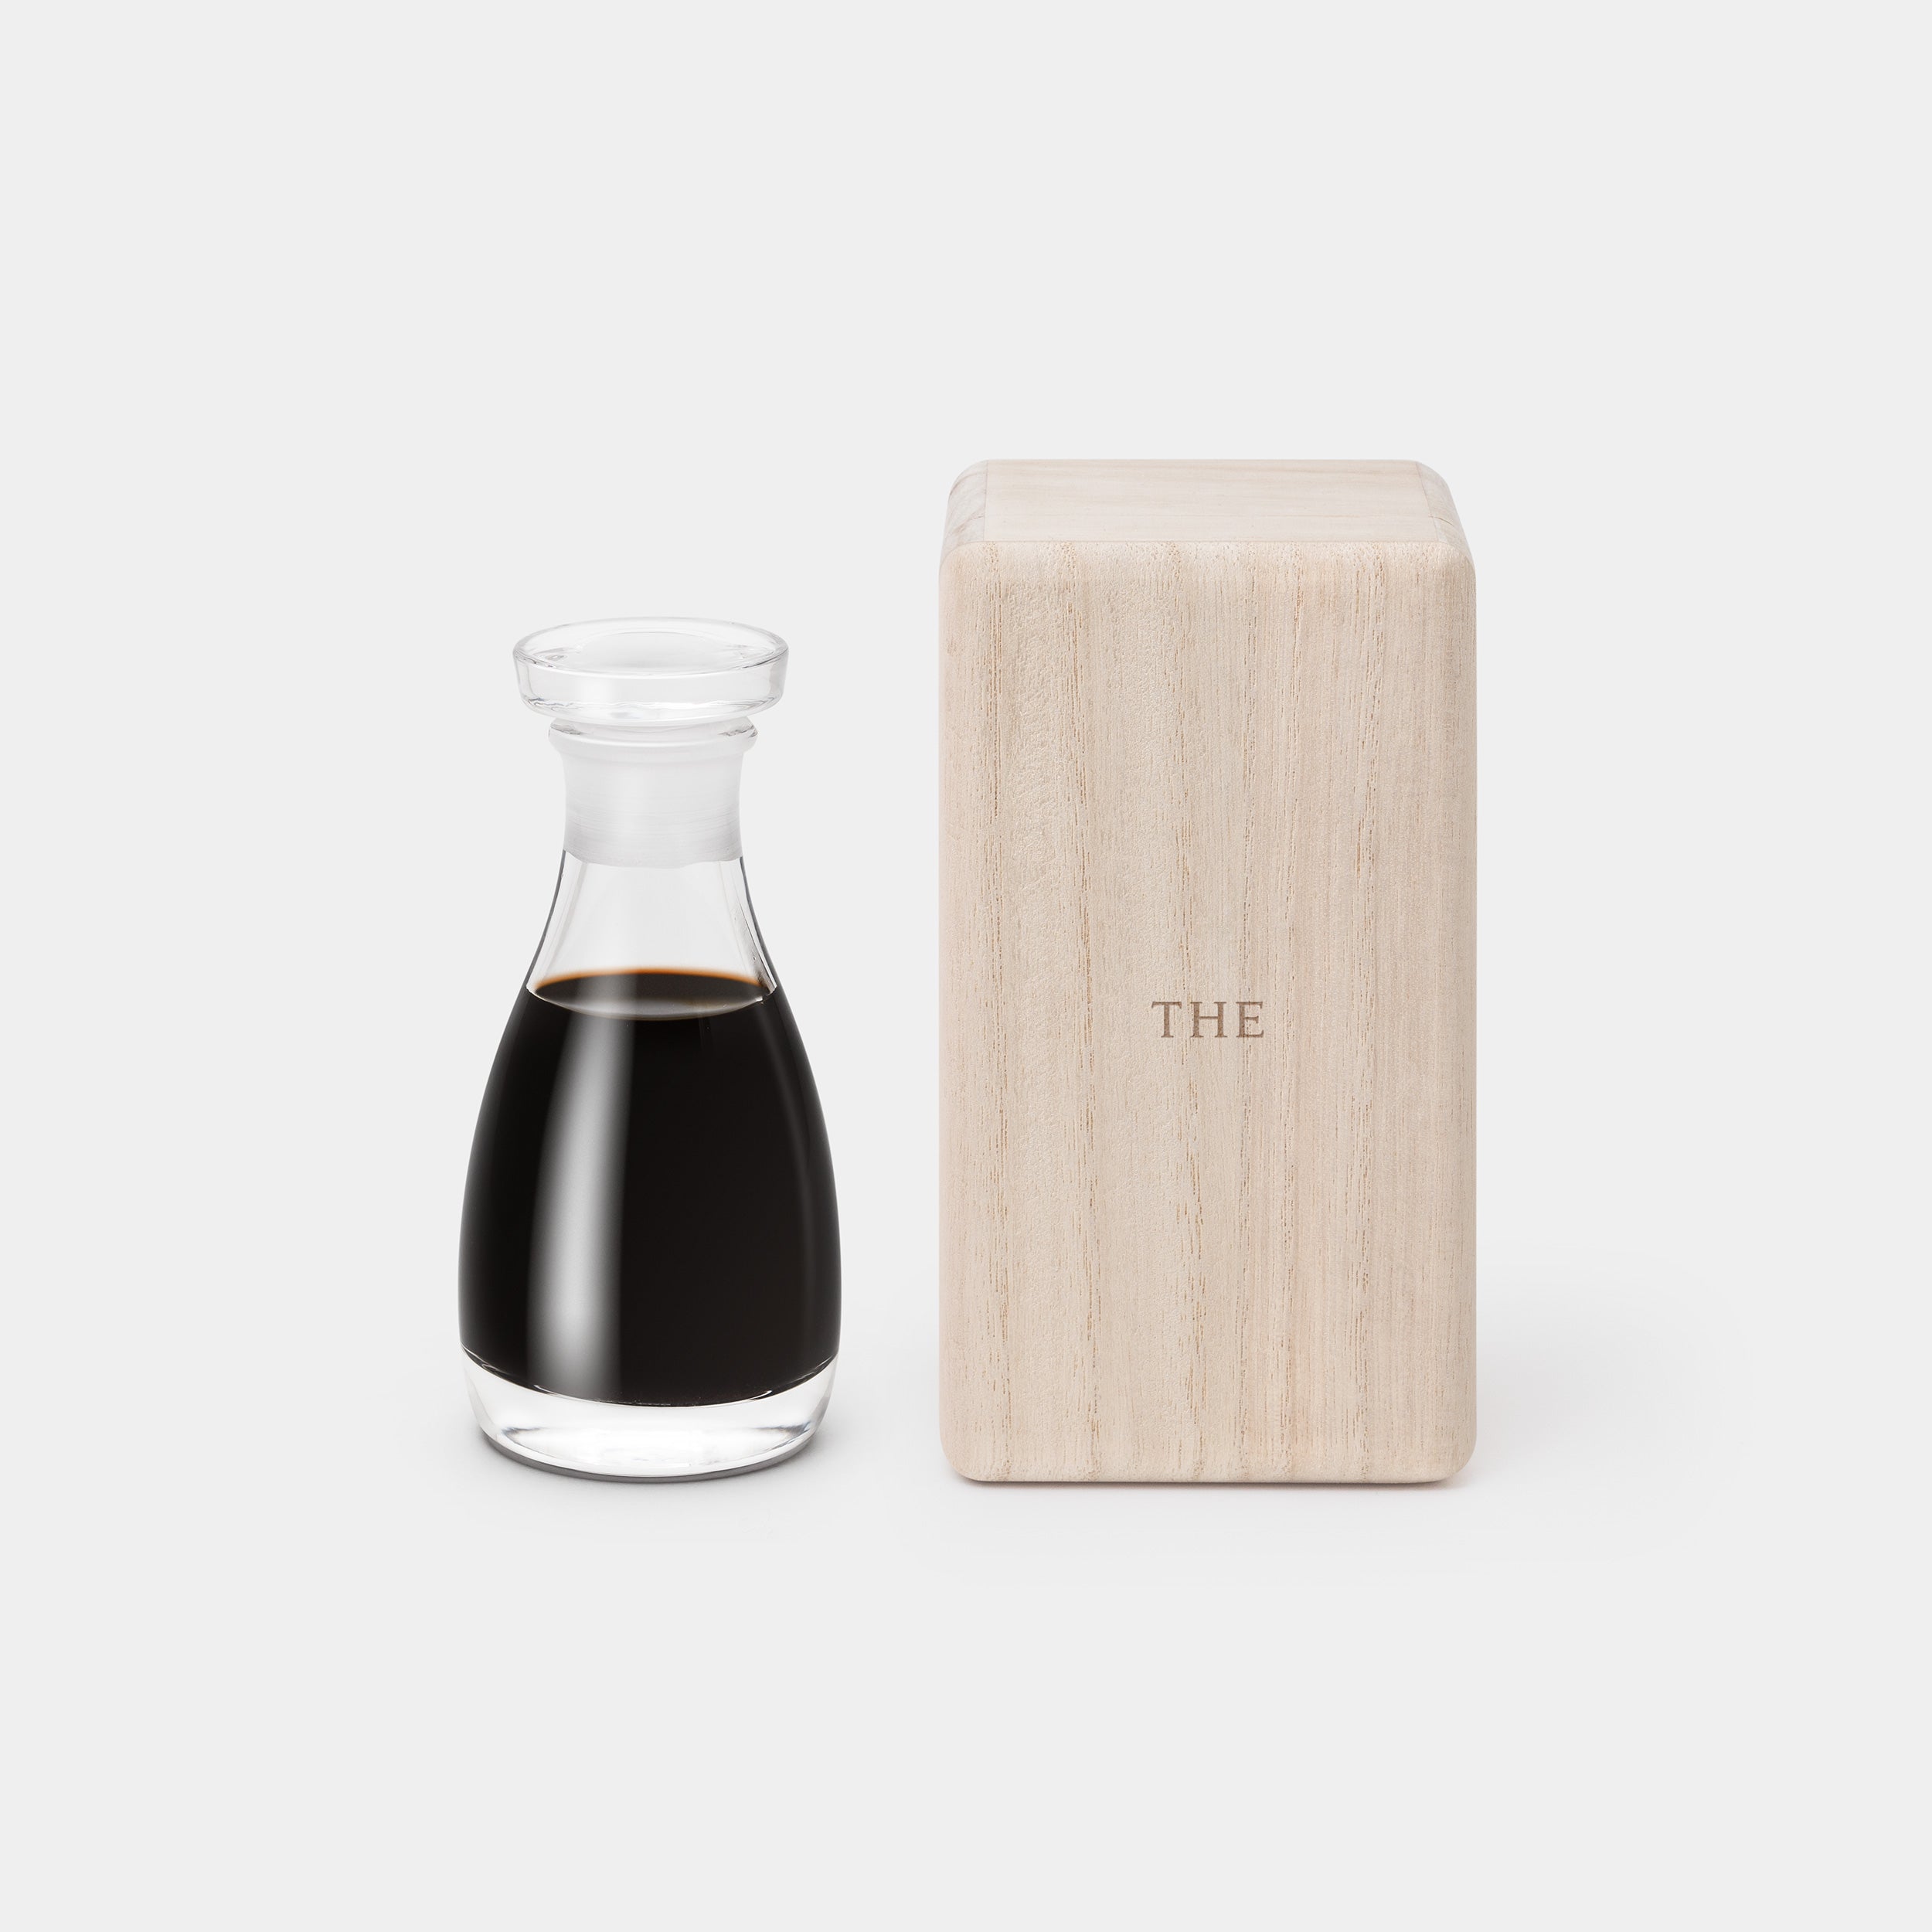 THE Soy Sauce Cruet with Gift Box